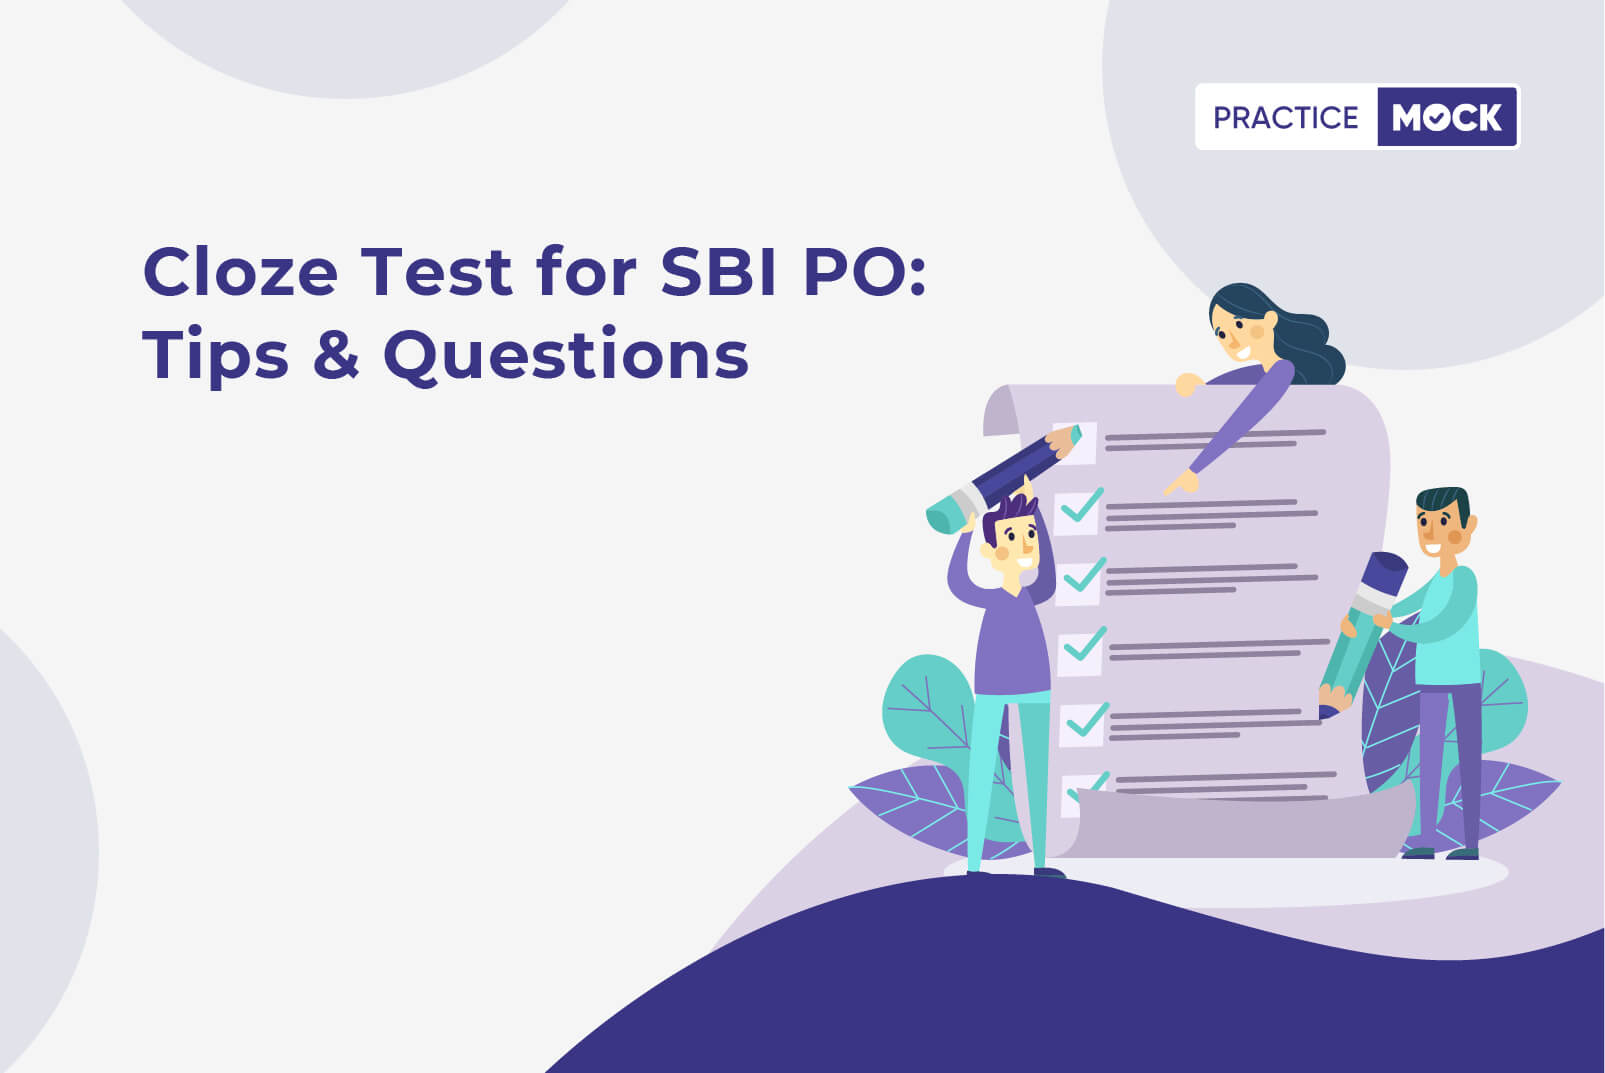 Cloze test for SBI PO - Tips & Questions